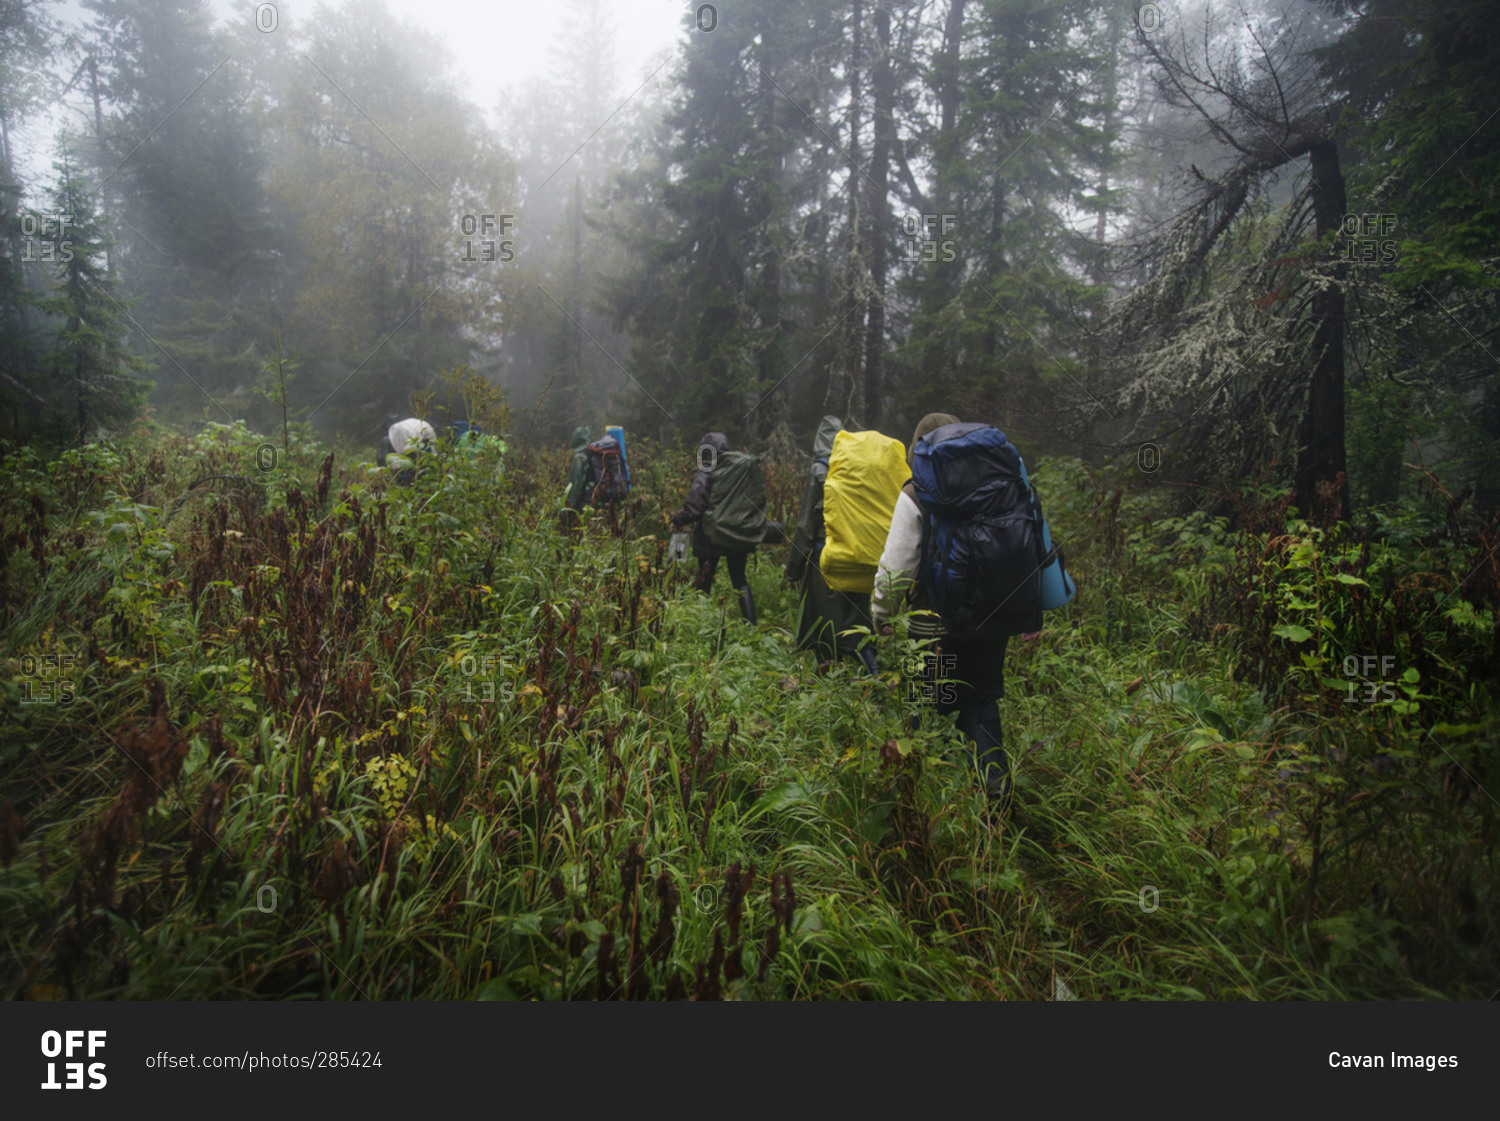 Group of backpackers in rain gear walking through tall grass in woods